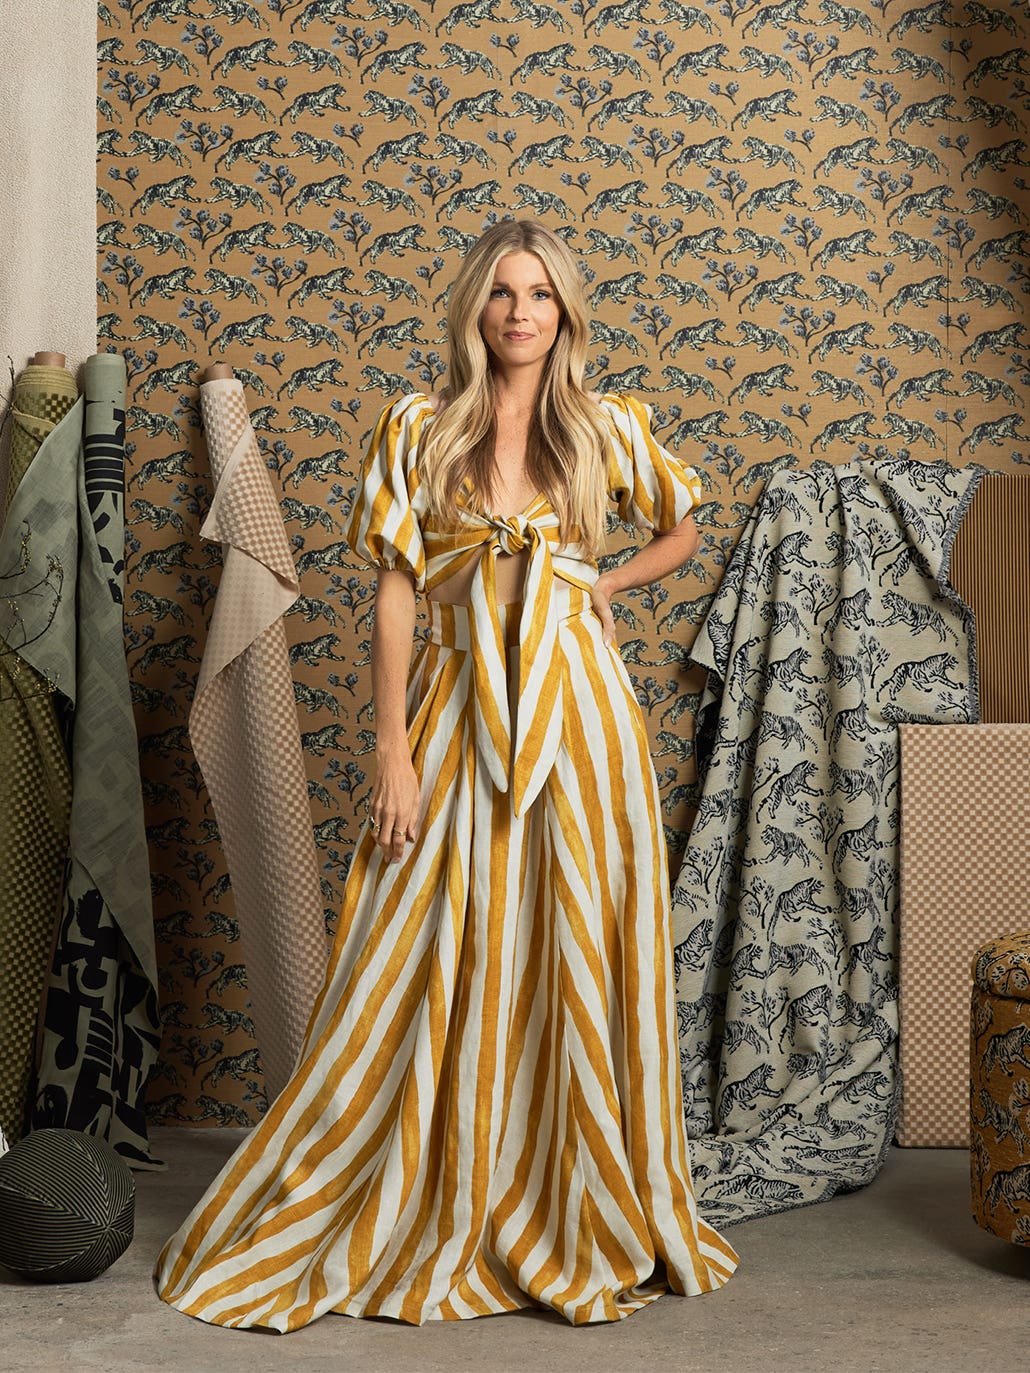 Sarah Sherman Samuel in white and yellow striped dress standing in front of fabric rolls with her new patterns for Lulu and Georgia